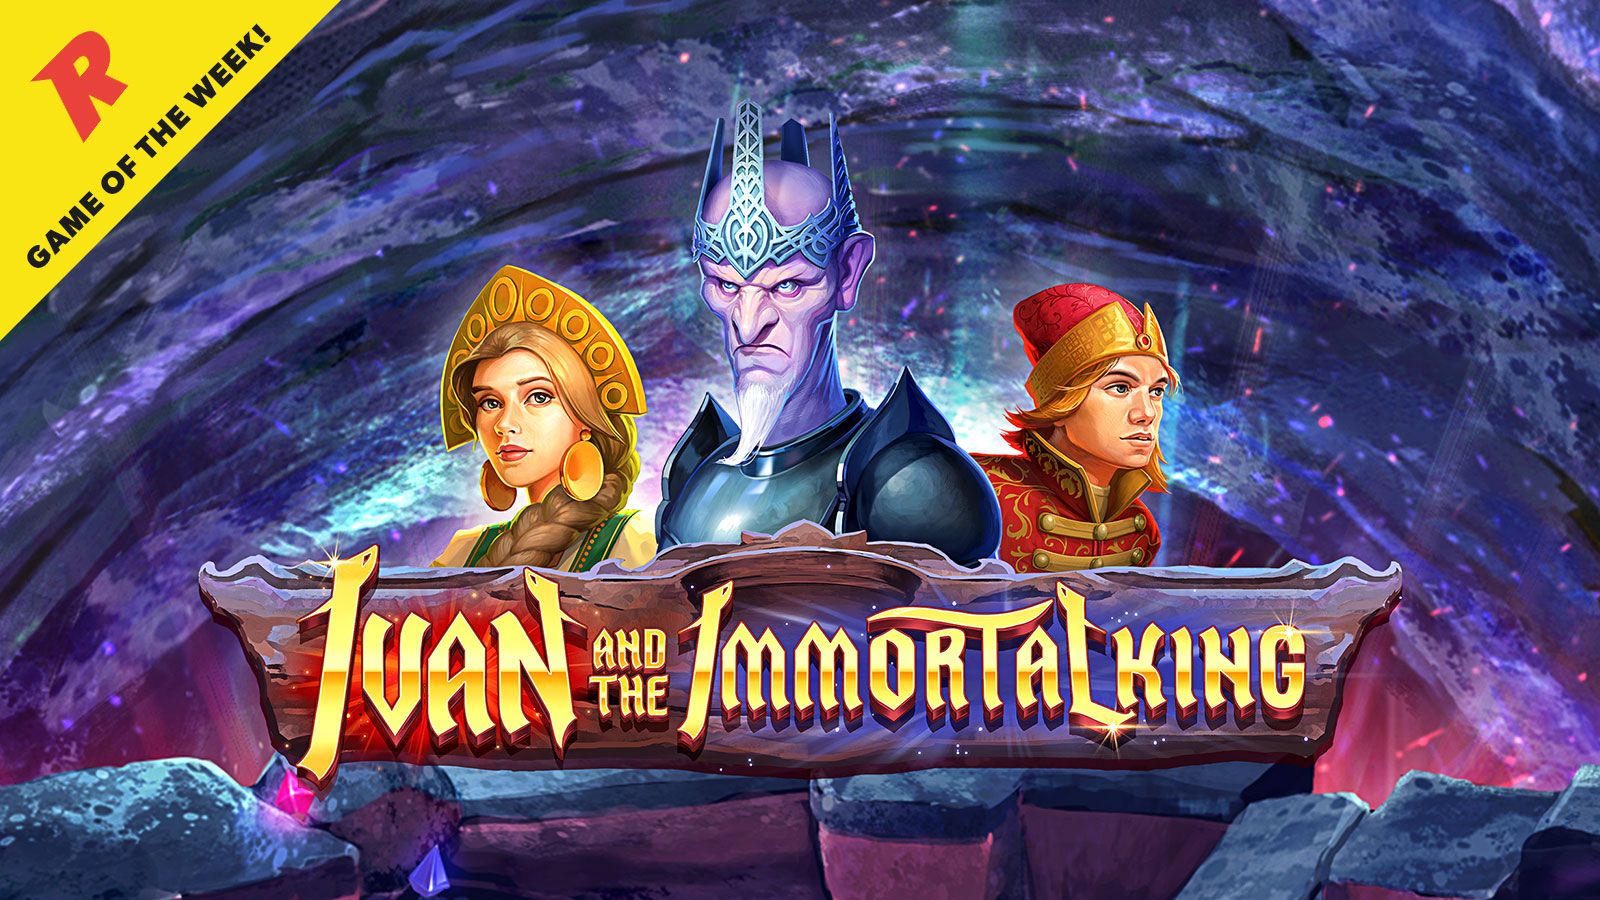 The Daily Life Of The Immortal King Wallpapers - Wallpaper Cave